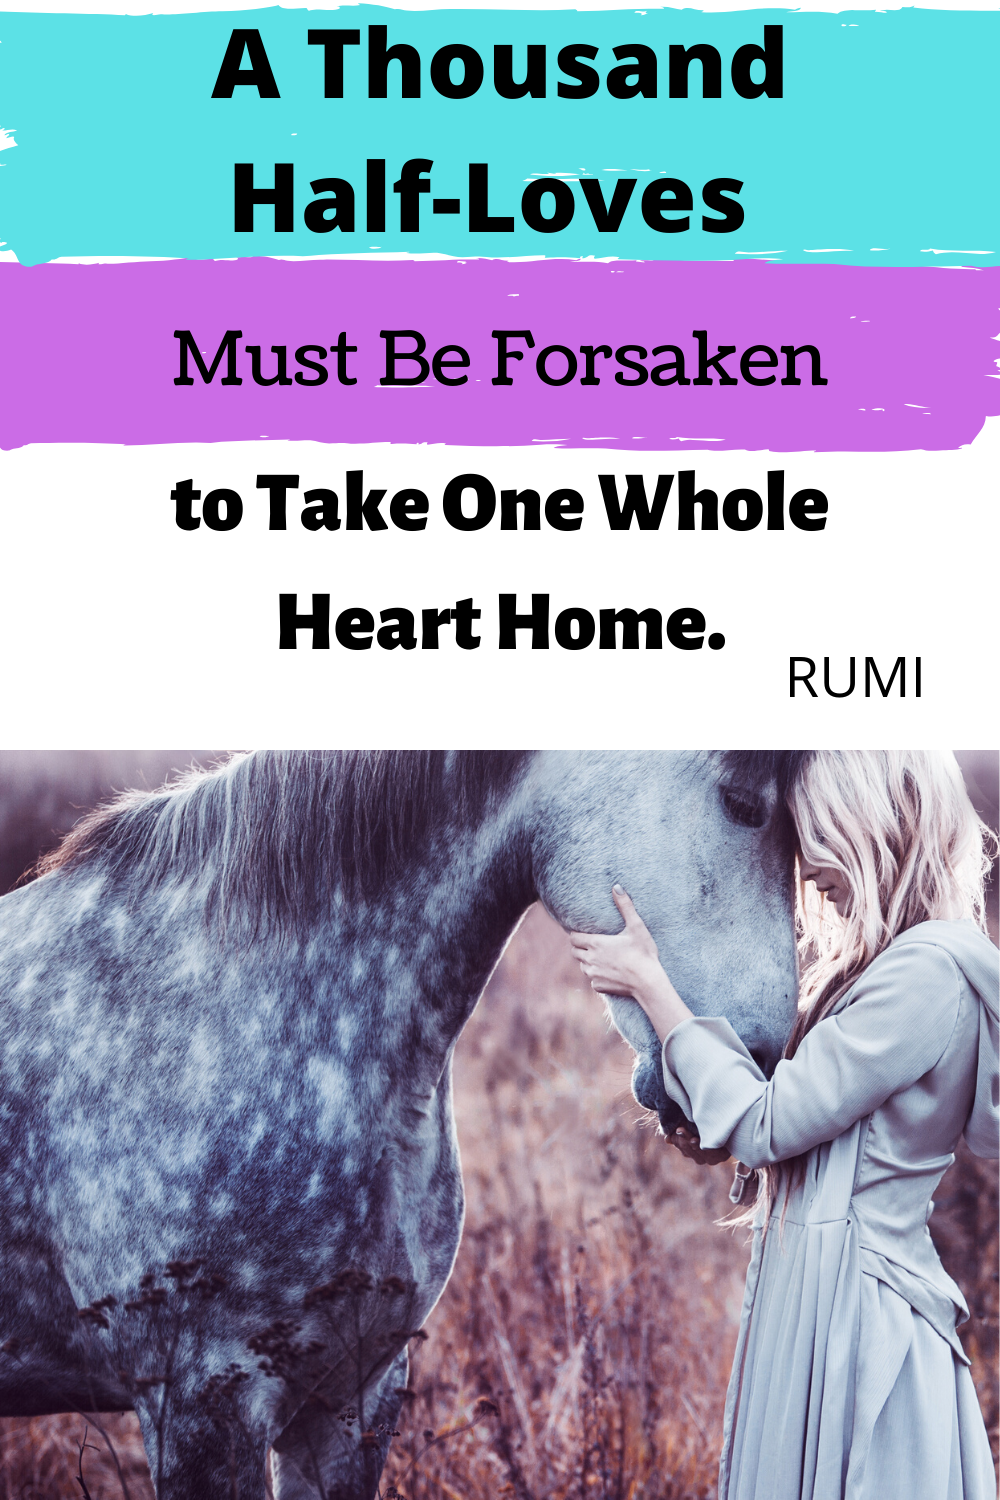 A thousand half-loves must be forsaken to take one whole heart home